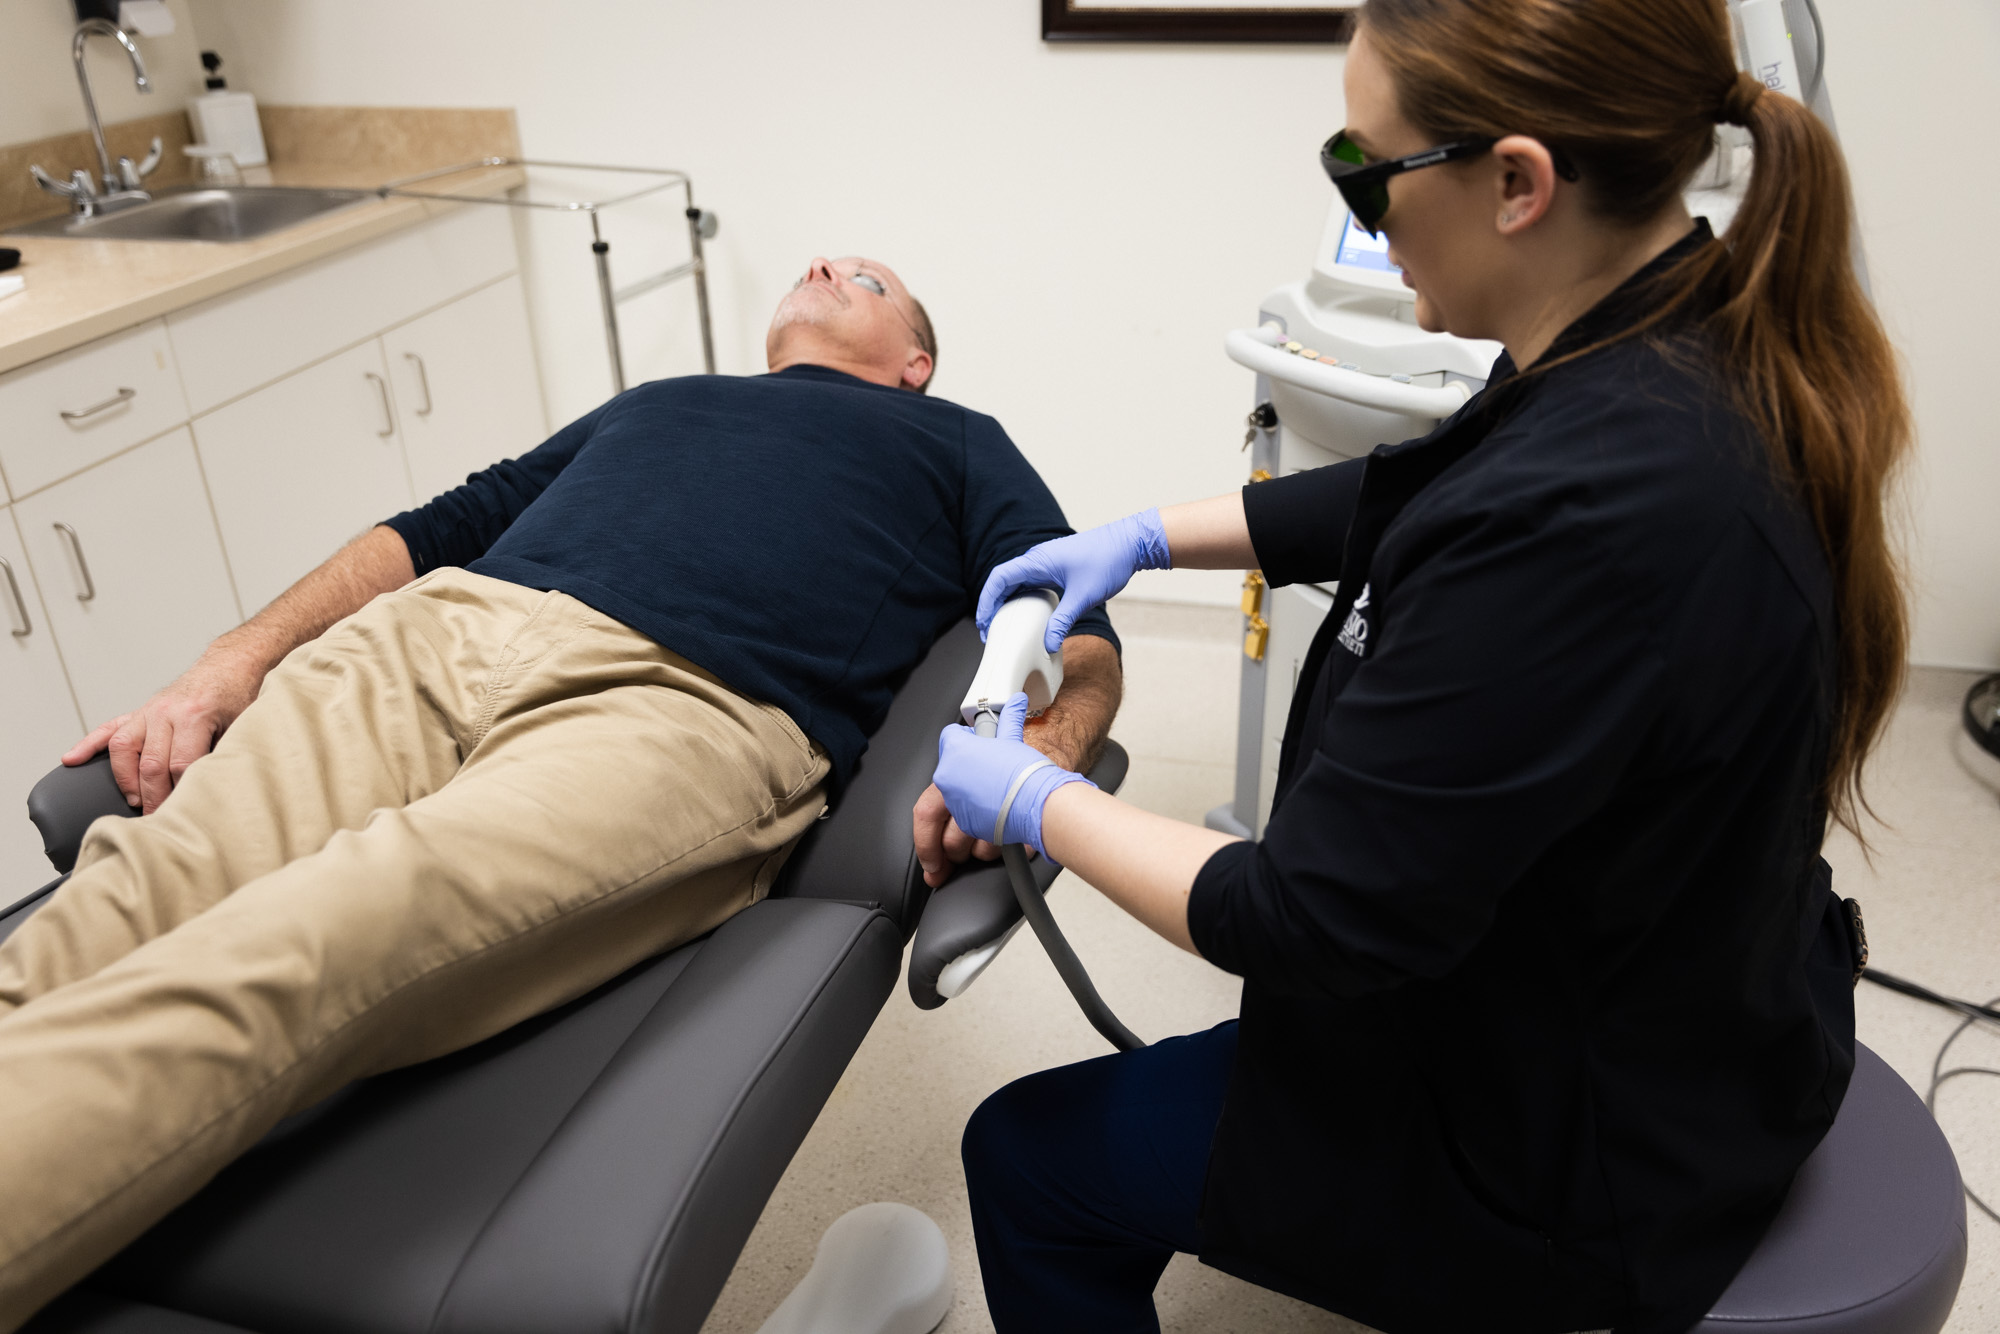 An Envision specialist ensures a patient's comfort during his laser hair removal.